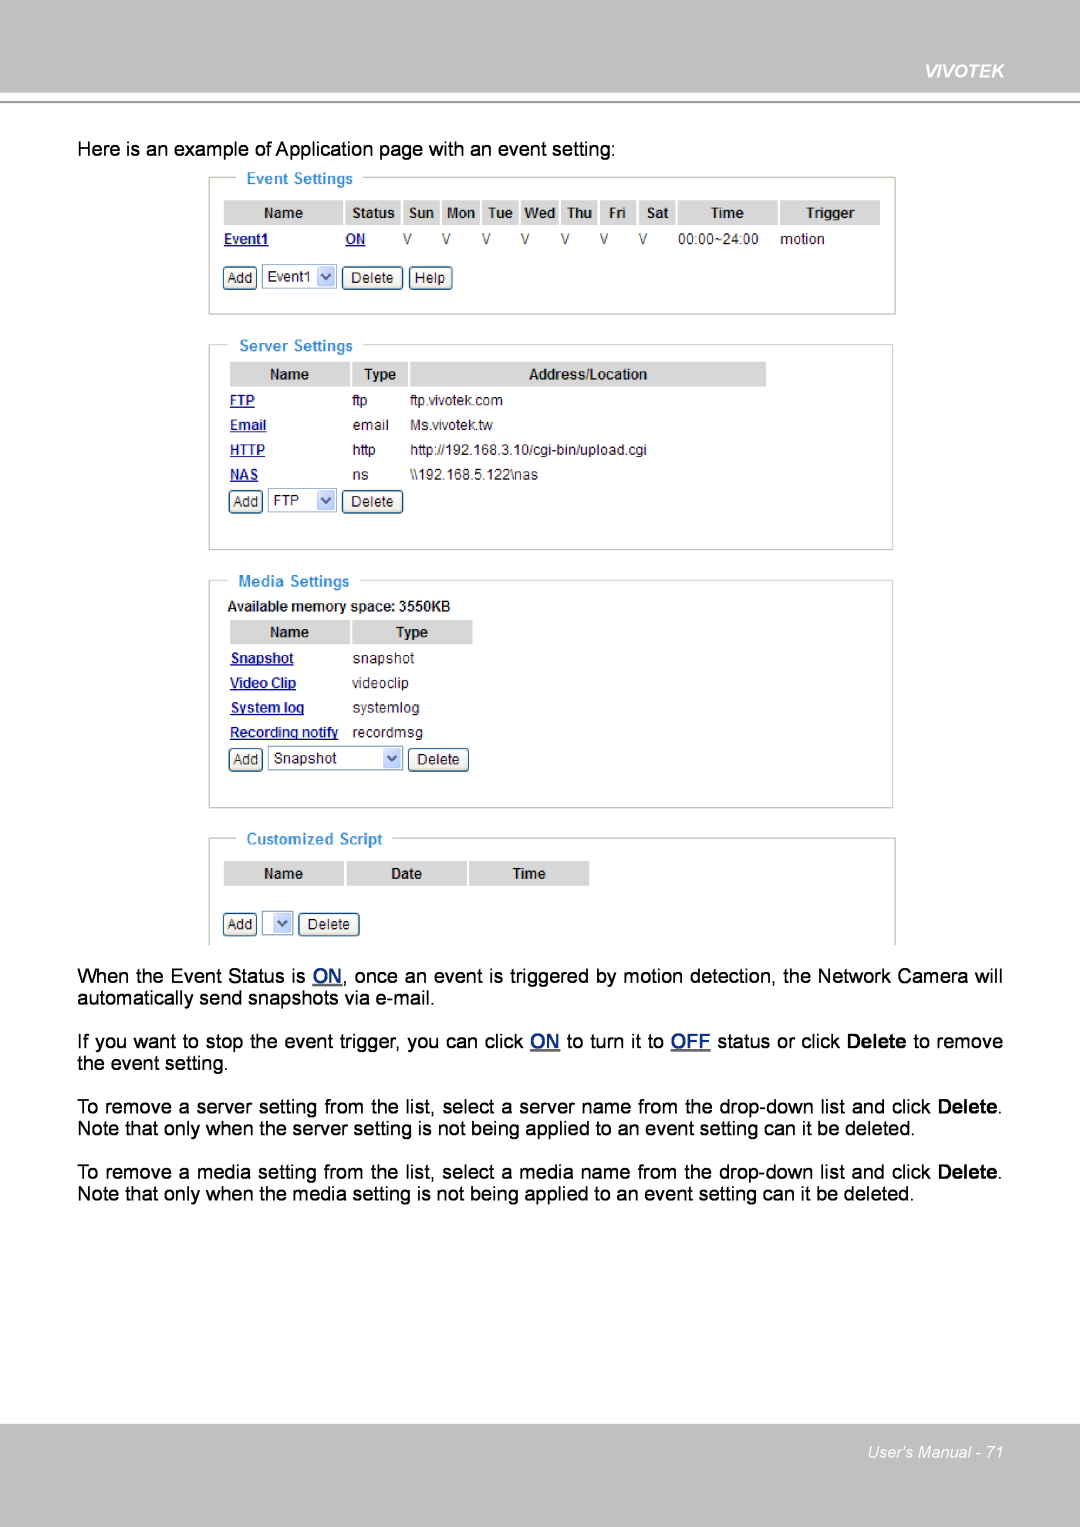 Vivotek PZ7132 manual Here is an example of Application page with an event setting 